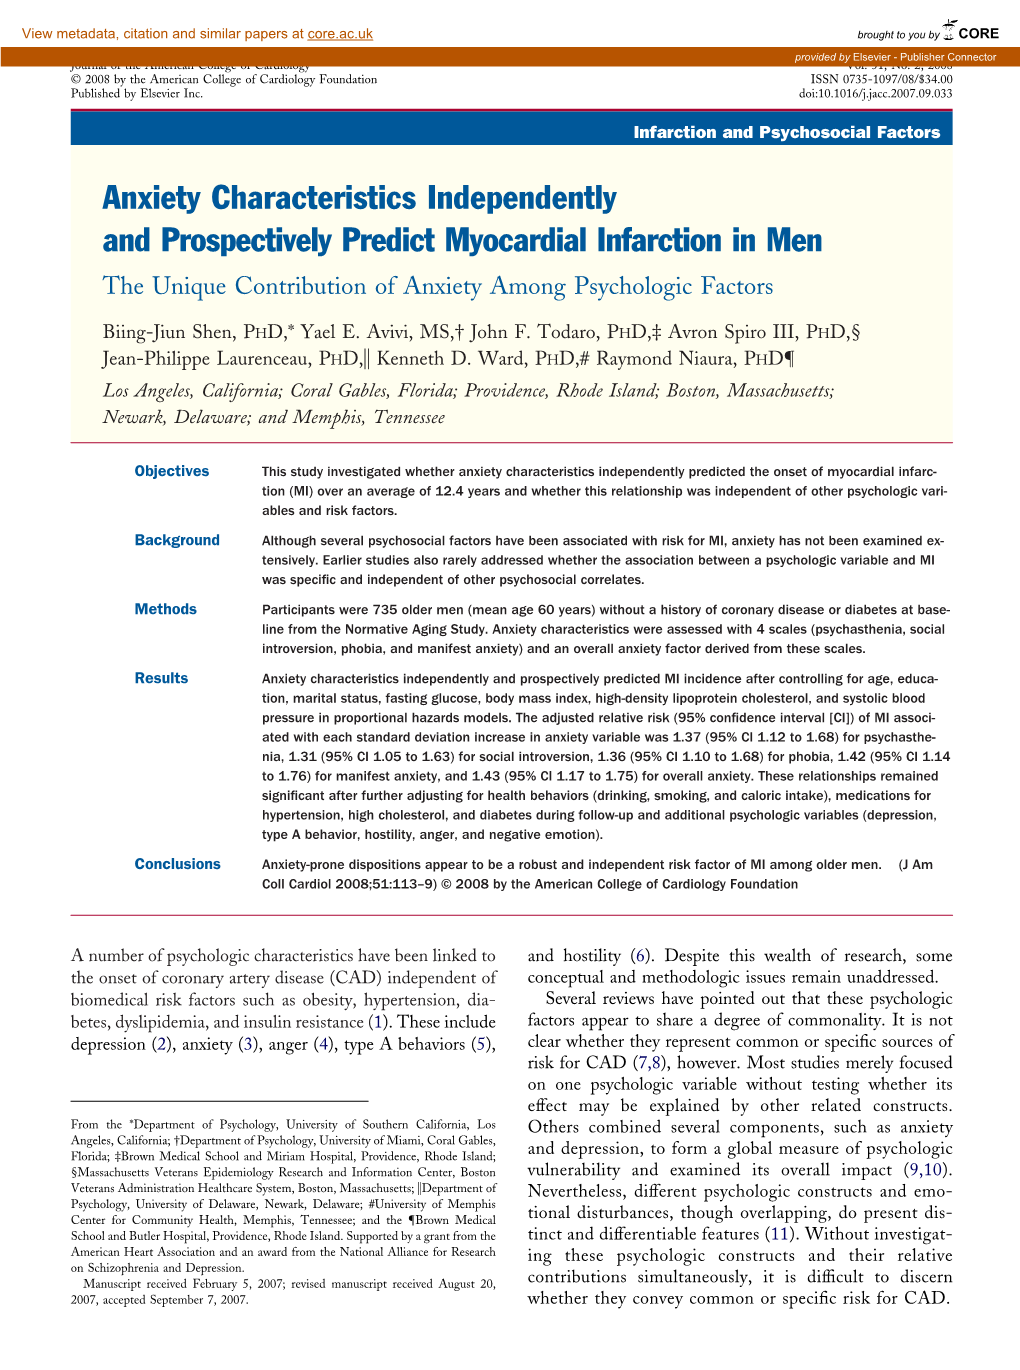 Anxiety Characteristics Independently and Prospectively Predict Myocardial Infarction in Men the Unique Contribution of Anxiety Among Psychologic Factors